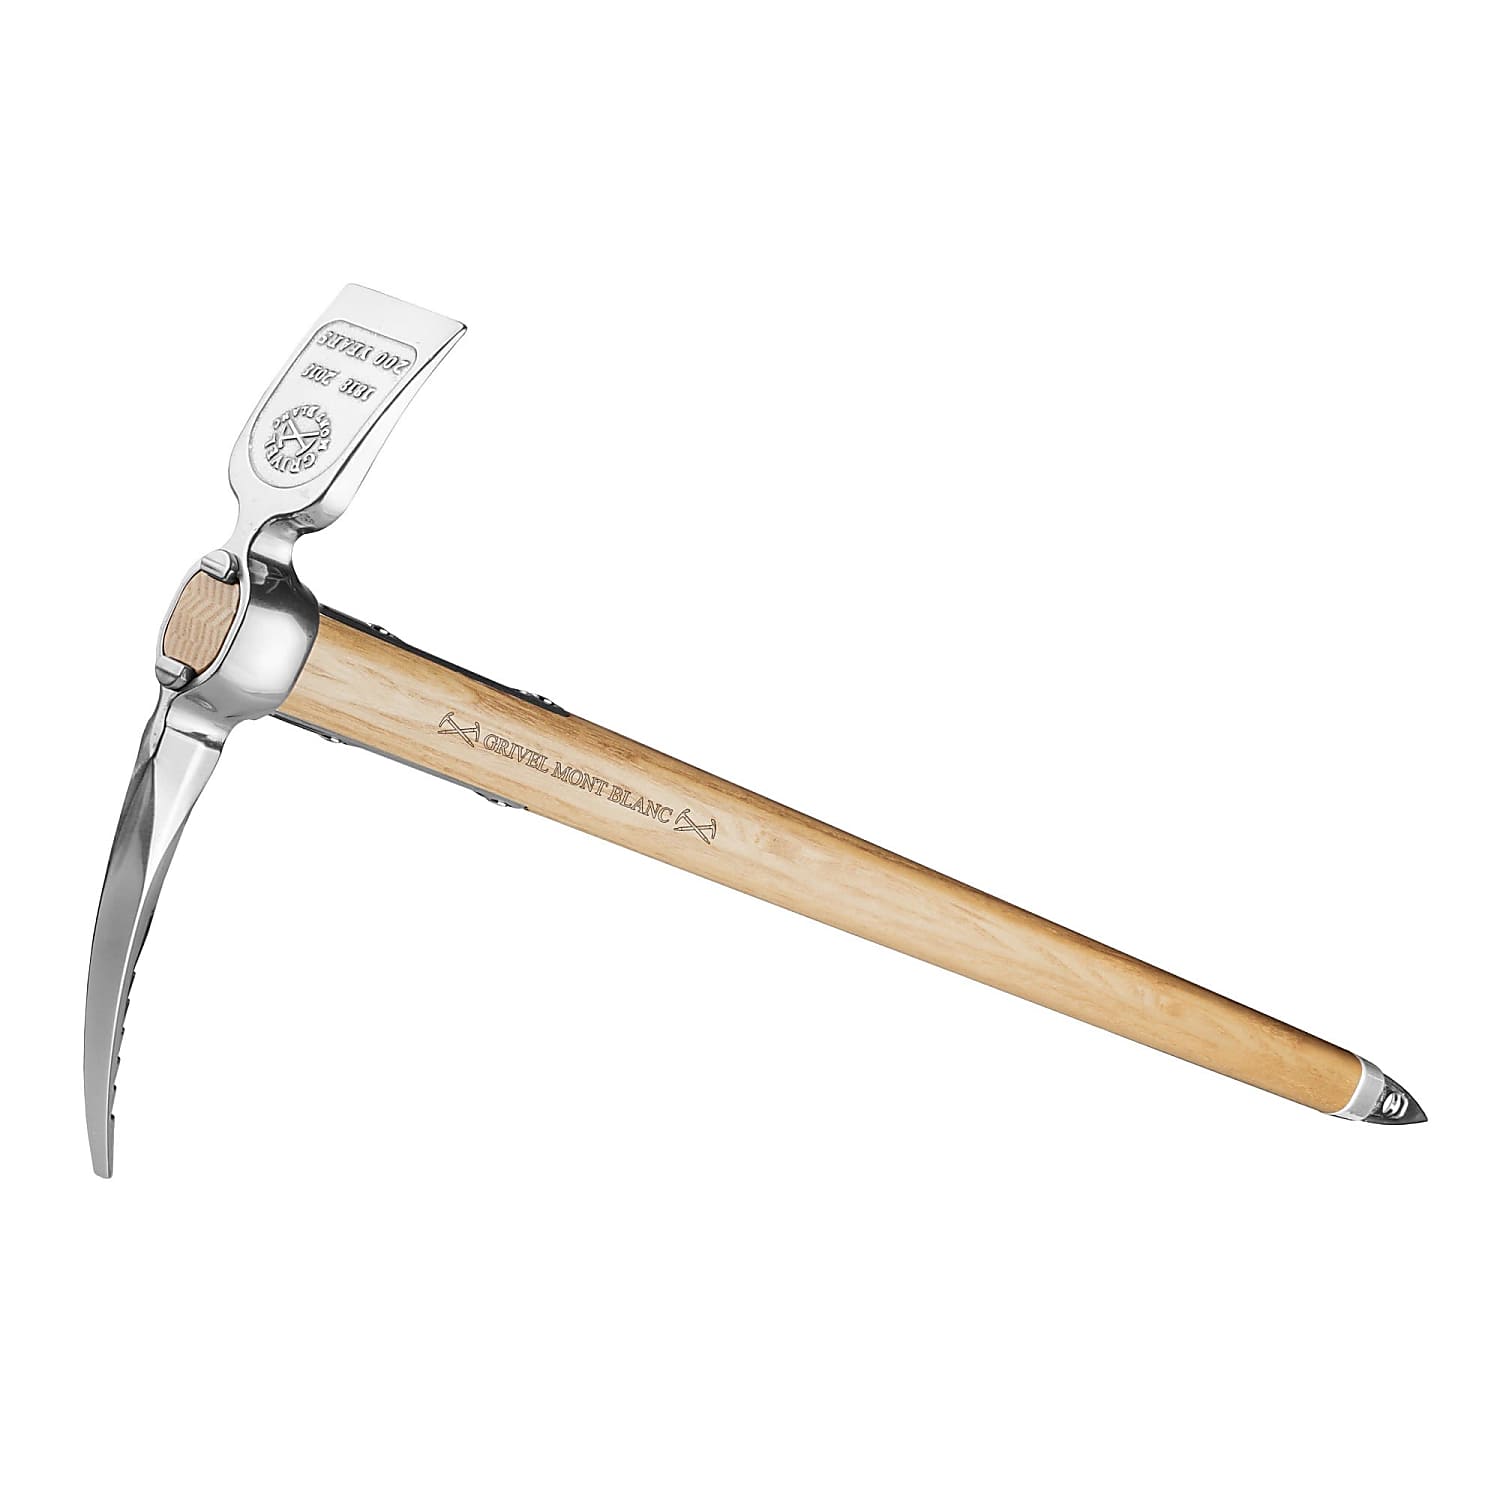 Grivel 200 ICE AXE, Wood - Fast and cheap shipping - www.exxpozed.com